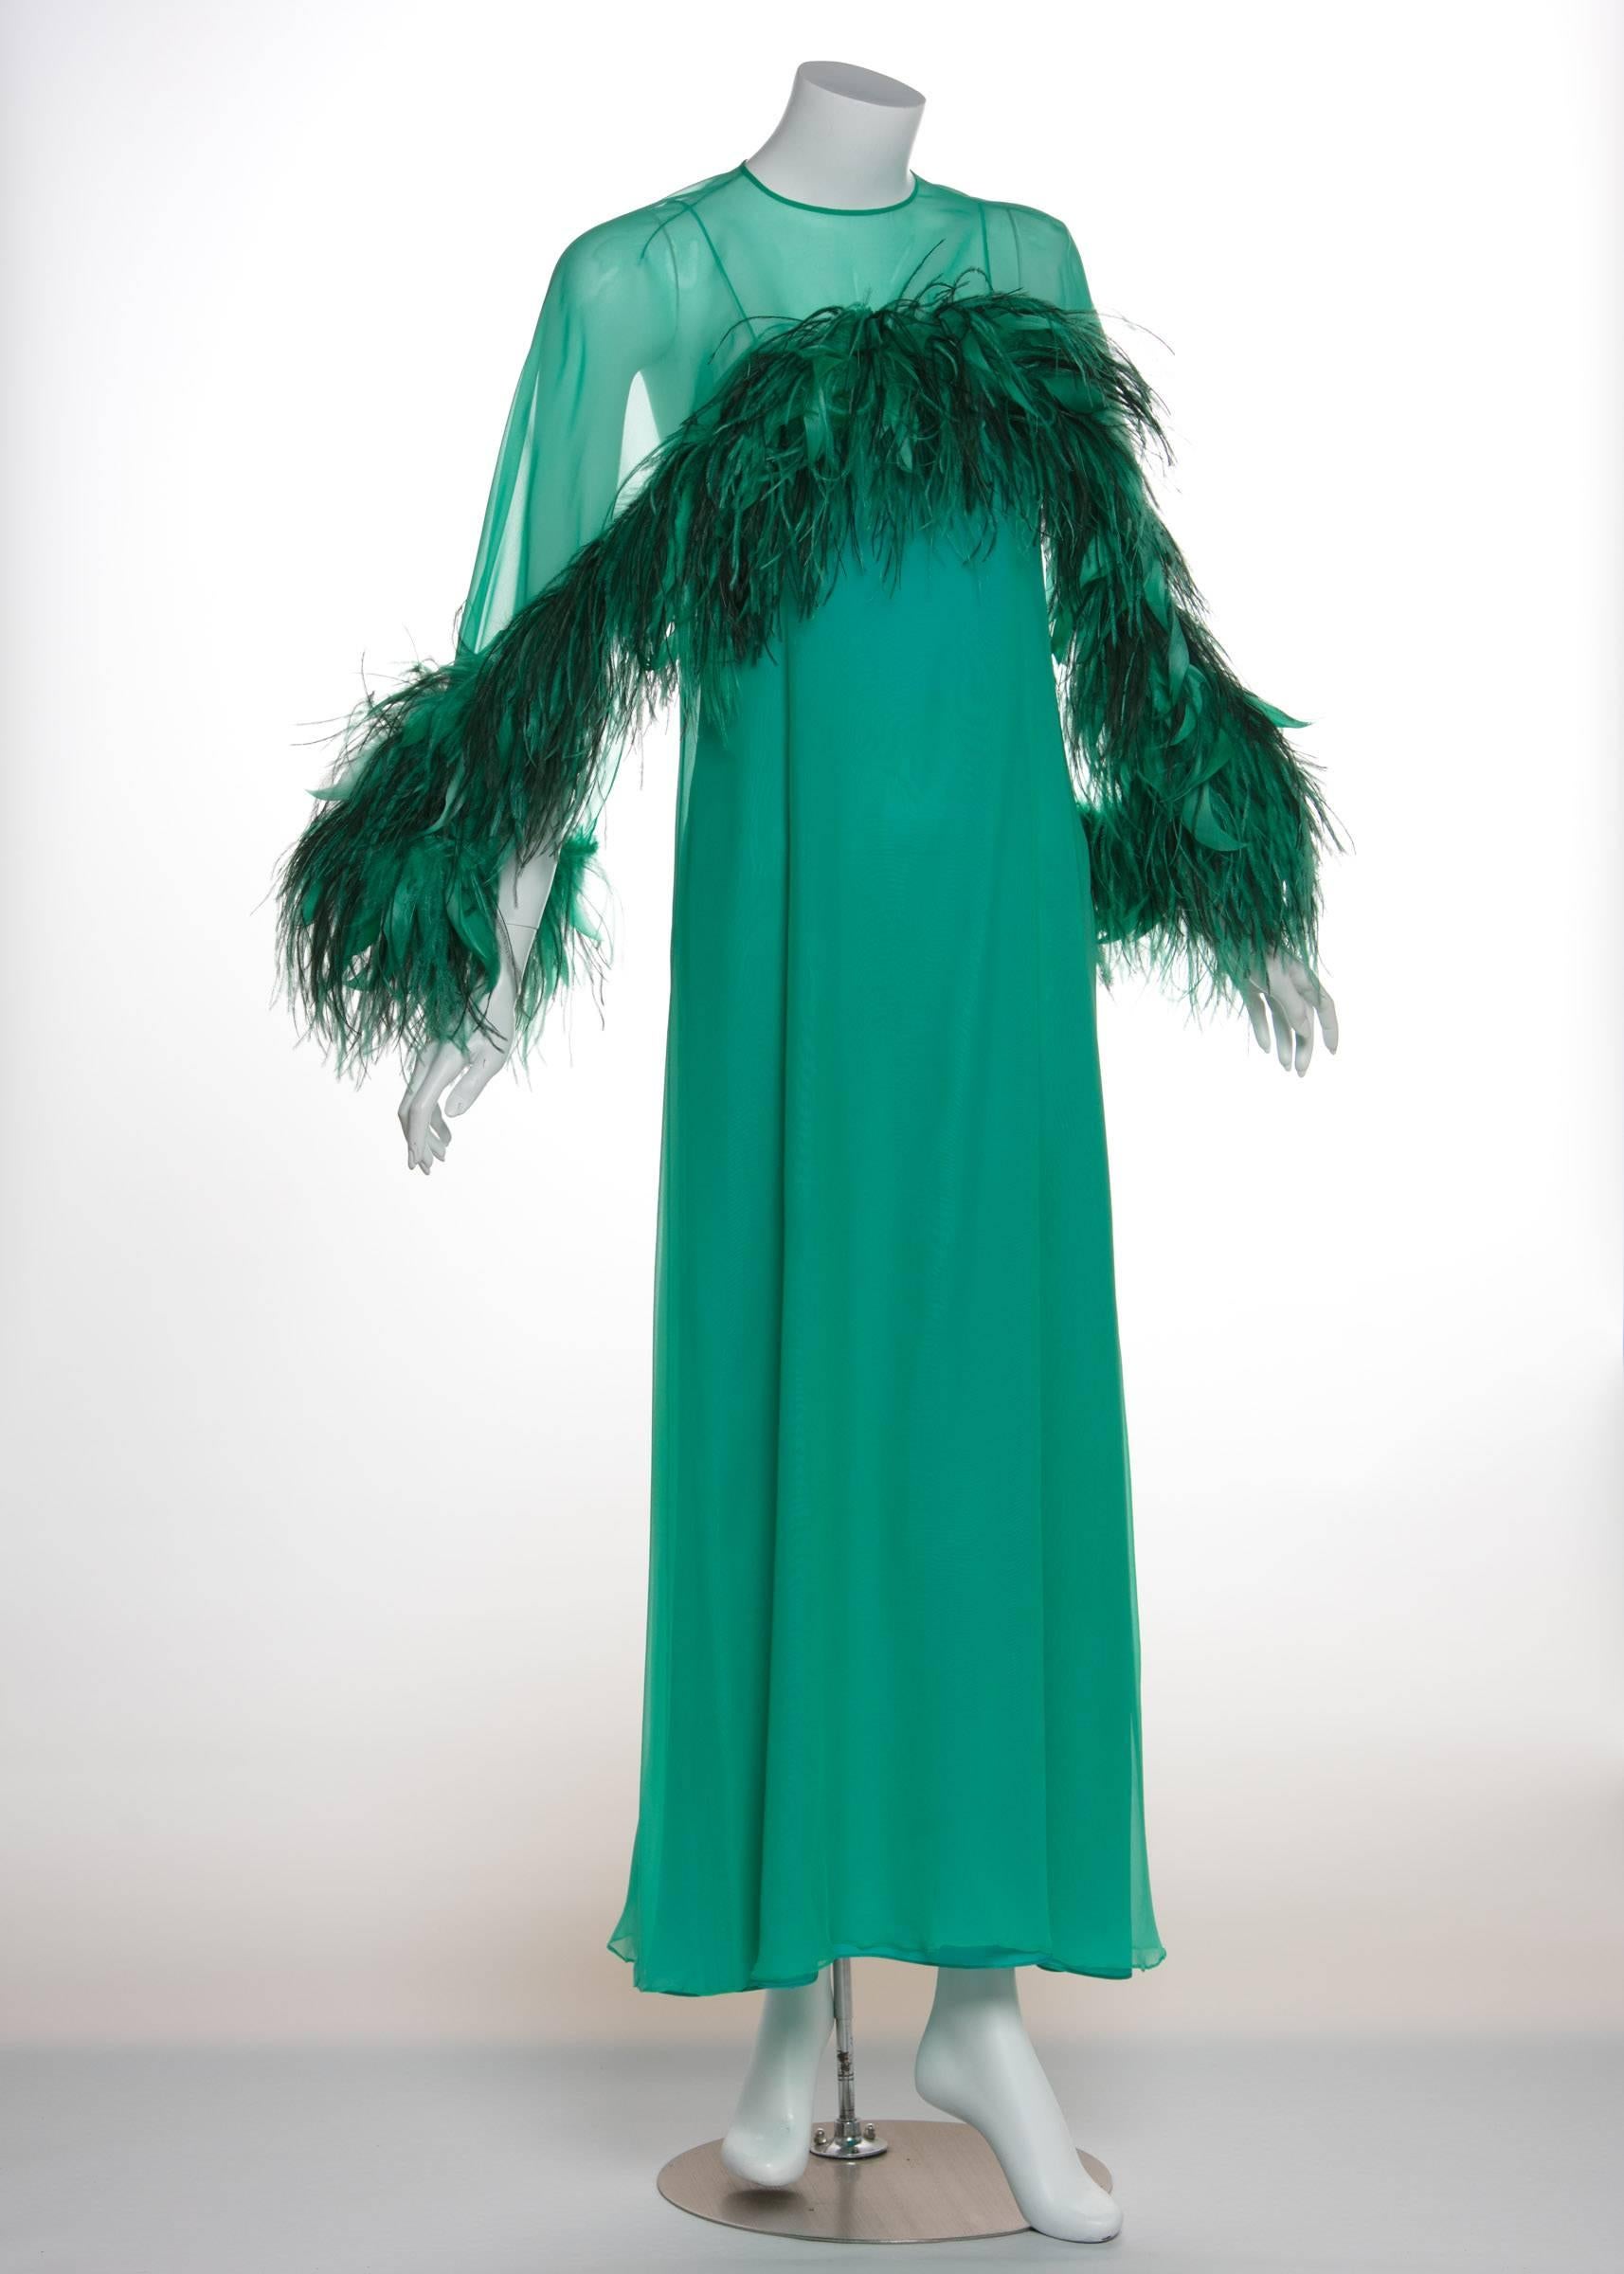 1970s Malcolm Starr Emerald Green Chiffon Gown & Ostrich Feather Cape Set 2